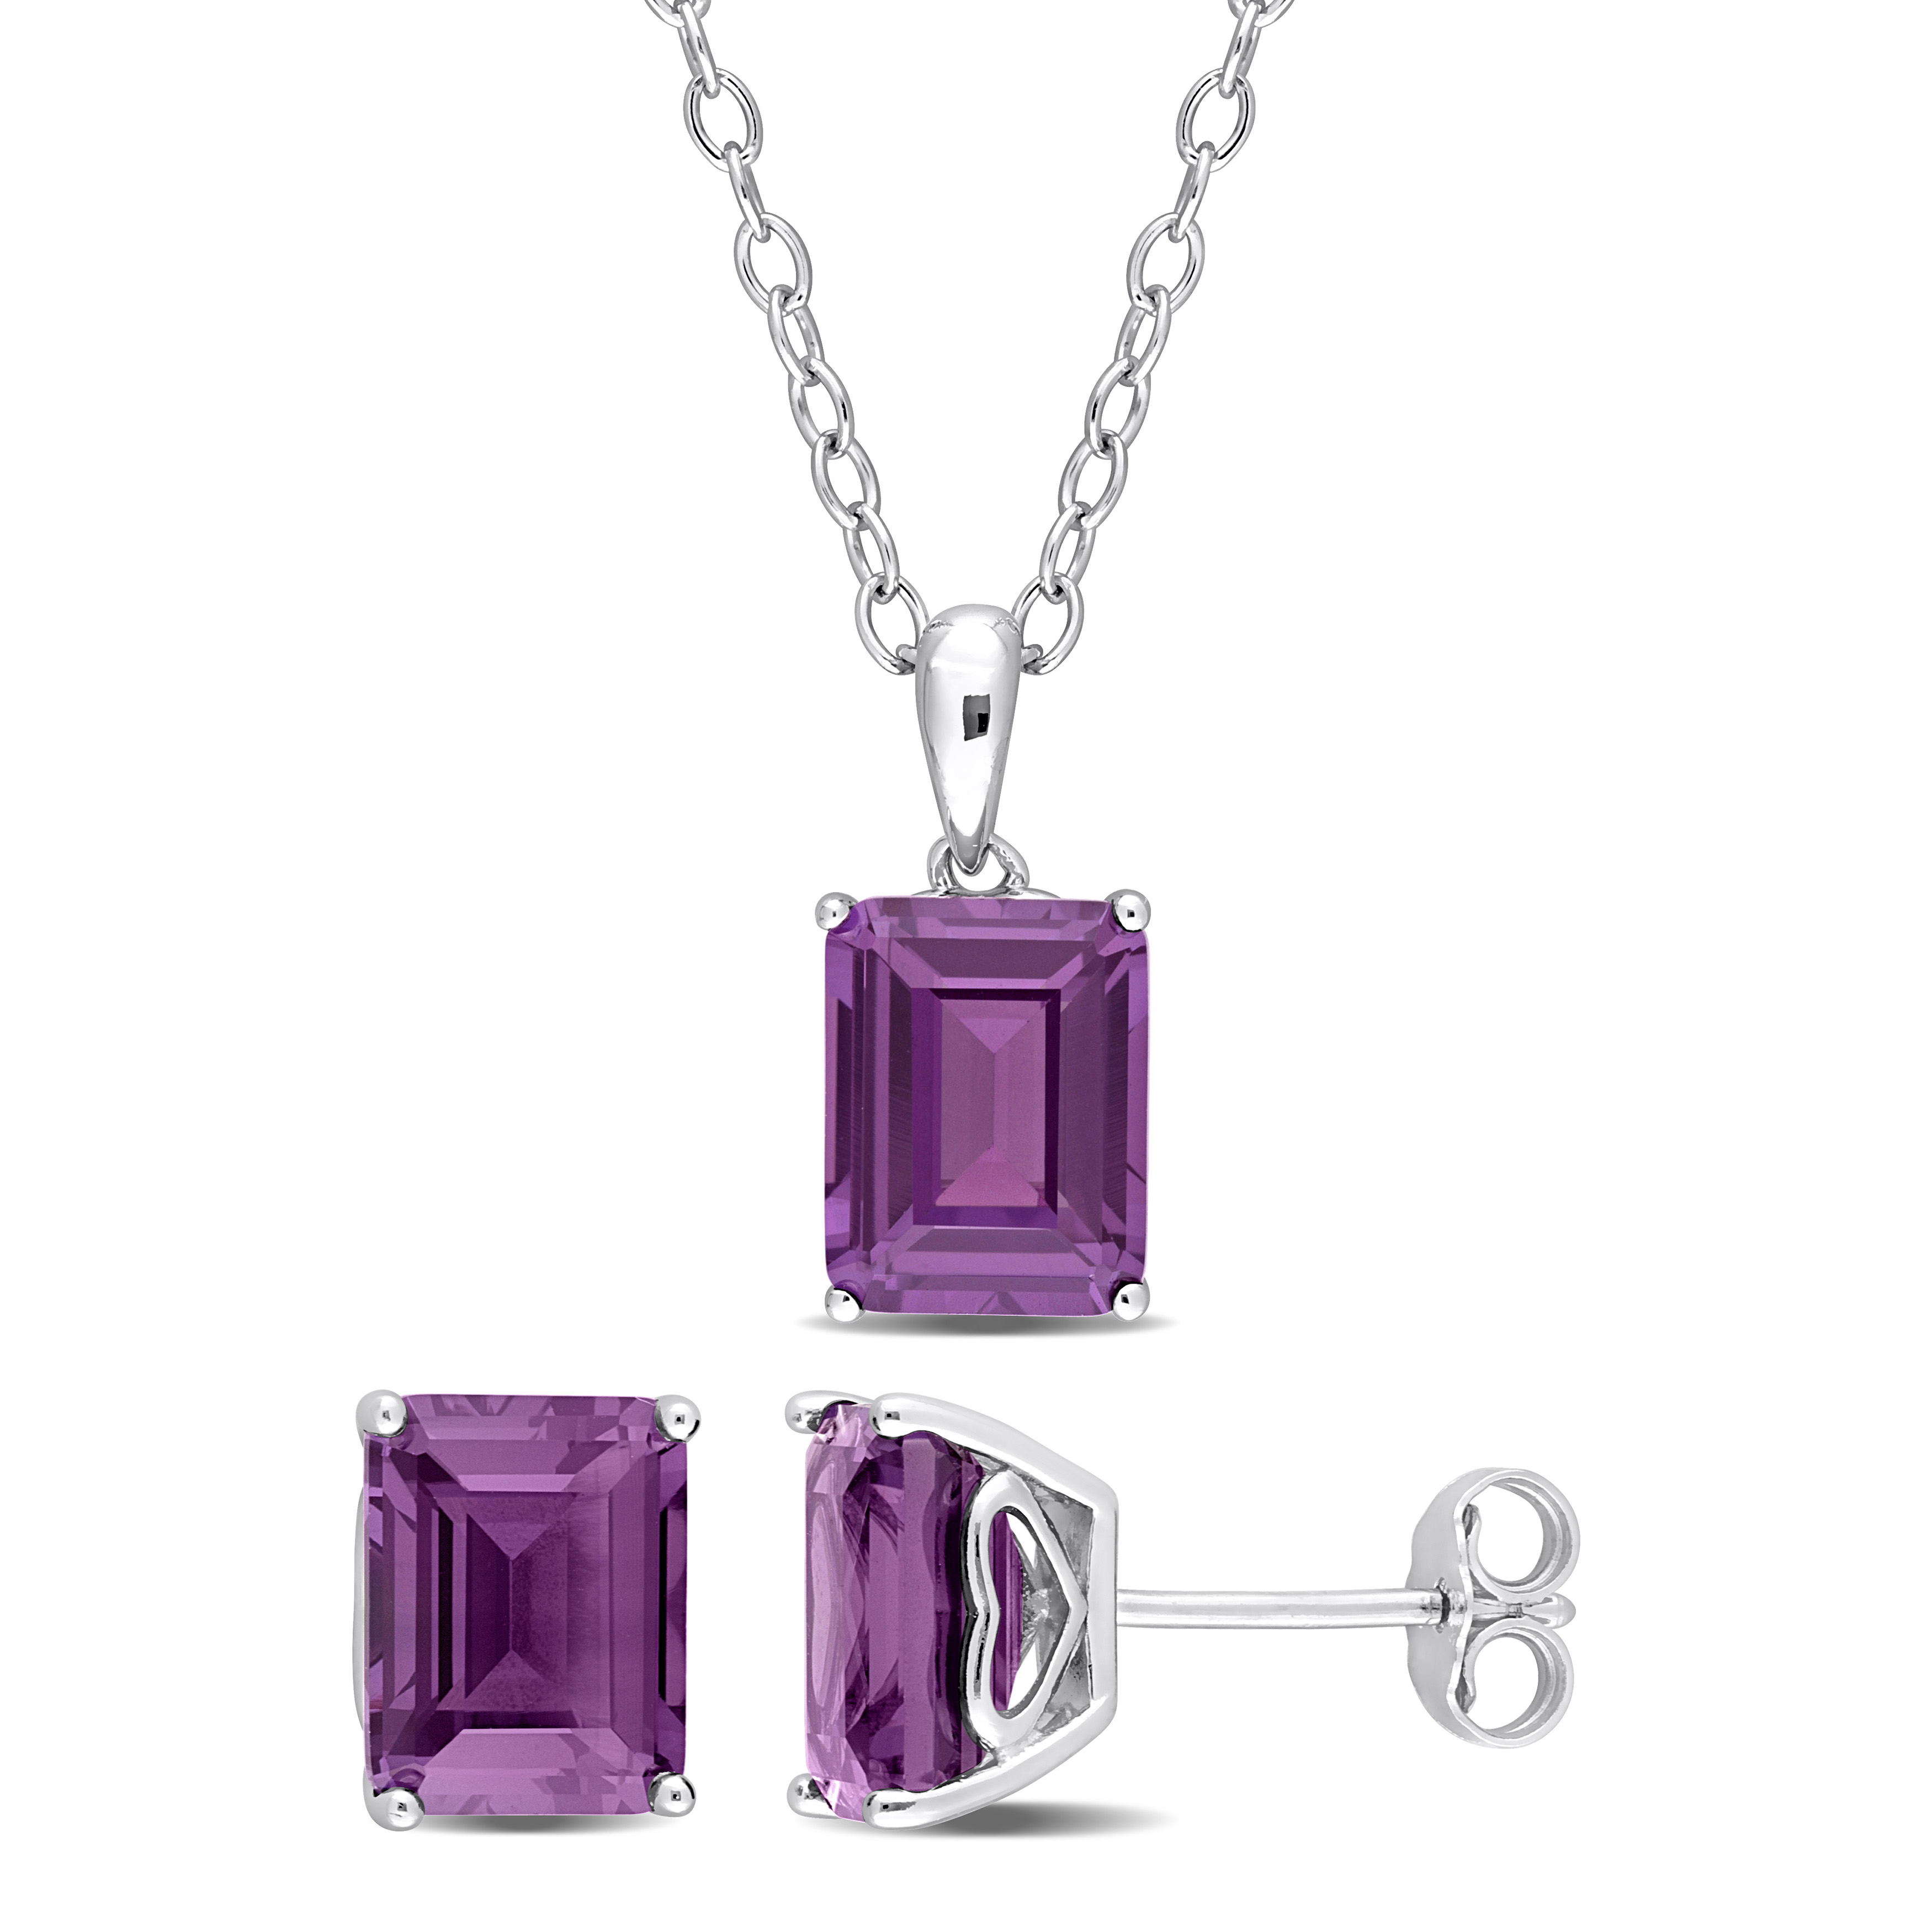 7 CT TGW Emerald-Cut and Octagon Simulated Alexandrite 2-Piece Set of Pendant with Chain and Earrings in Sterling Silver